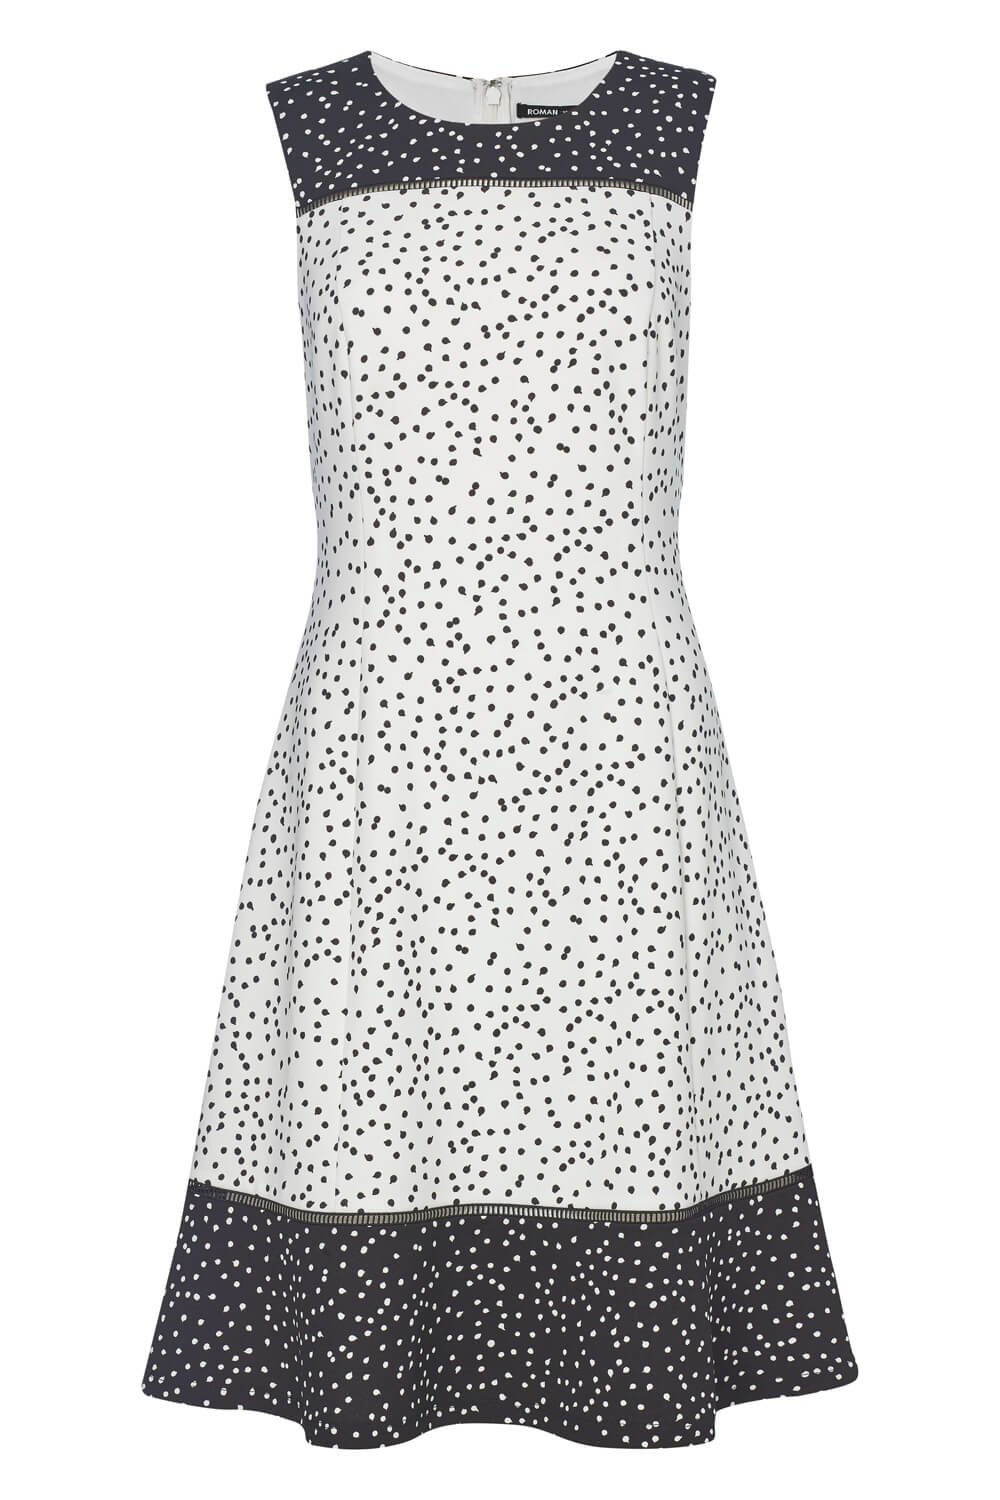 Ivory  Polka Dot Fit and Flare Dress, Image 3 of 3